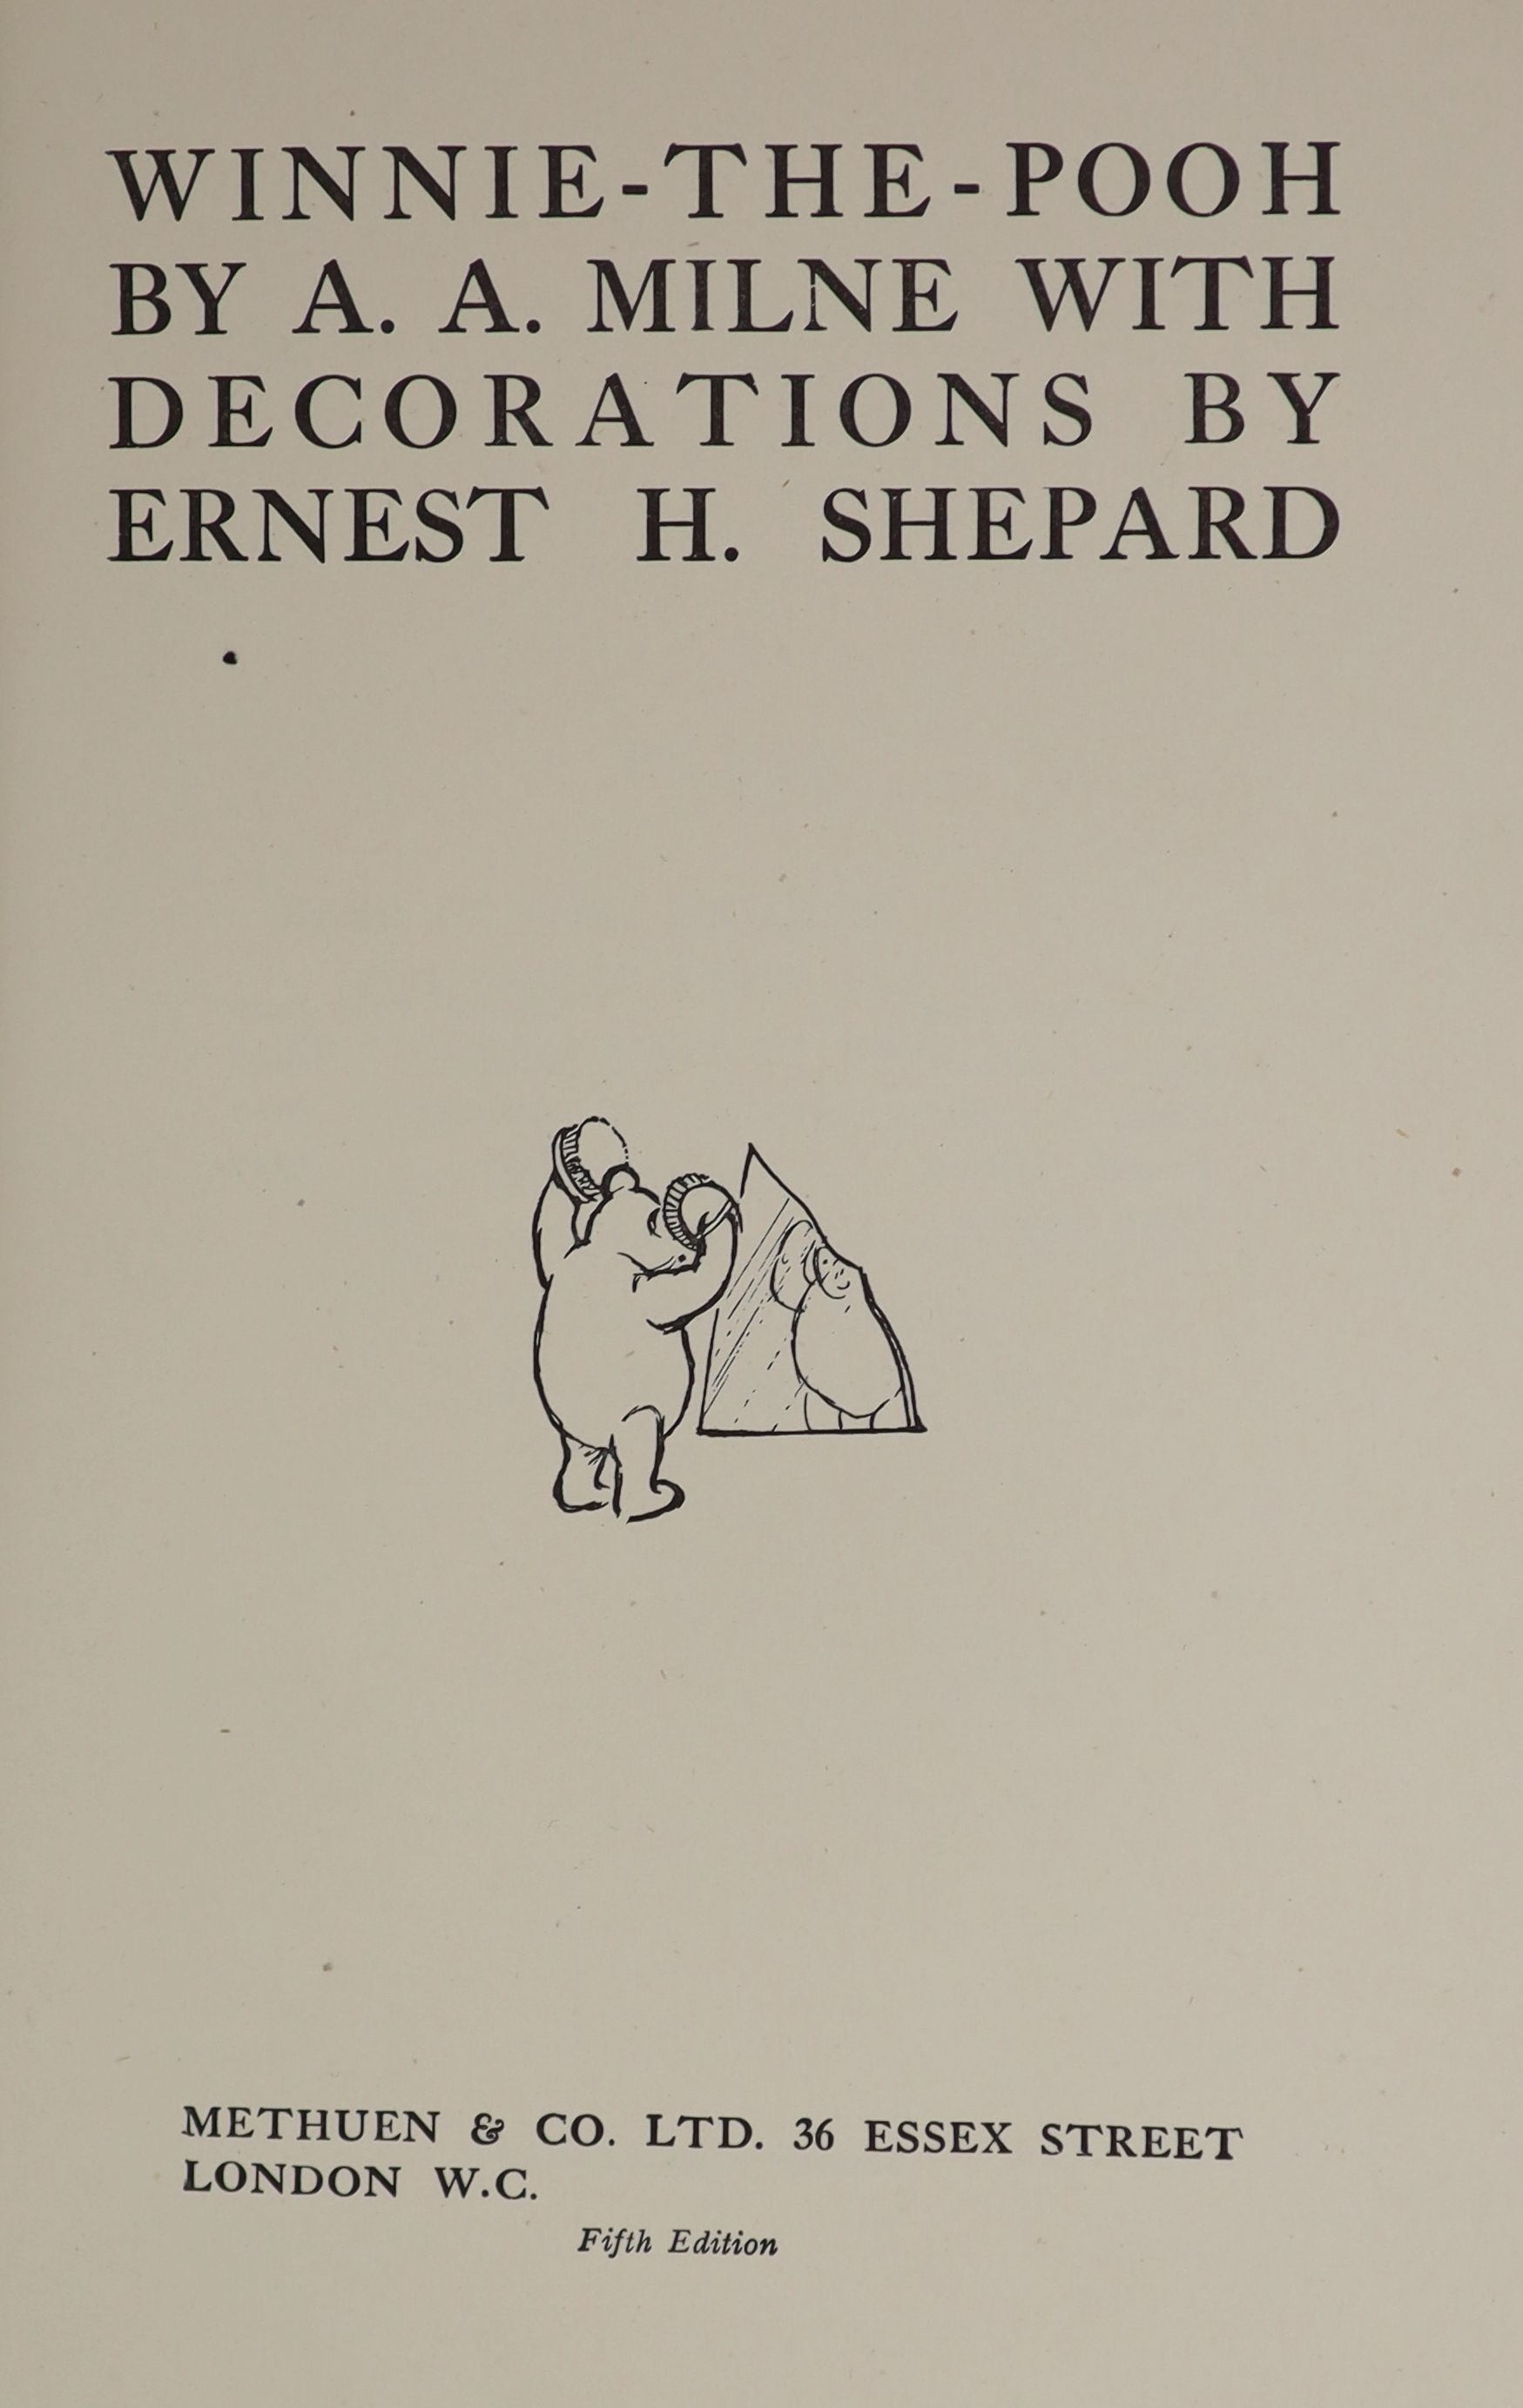 Milne, Alan Alexander - The House at Pooh Corner, 1st edition, illustrated by Ernest Shepard, 8vo, original pictorial boards, Methuen & Co. Ltd., London, 1928 and Winnie-the-Pooh, 5th edition, London, 1927 (2)